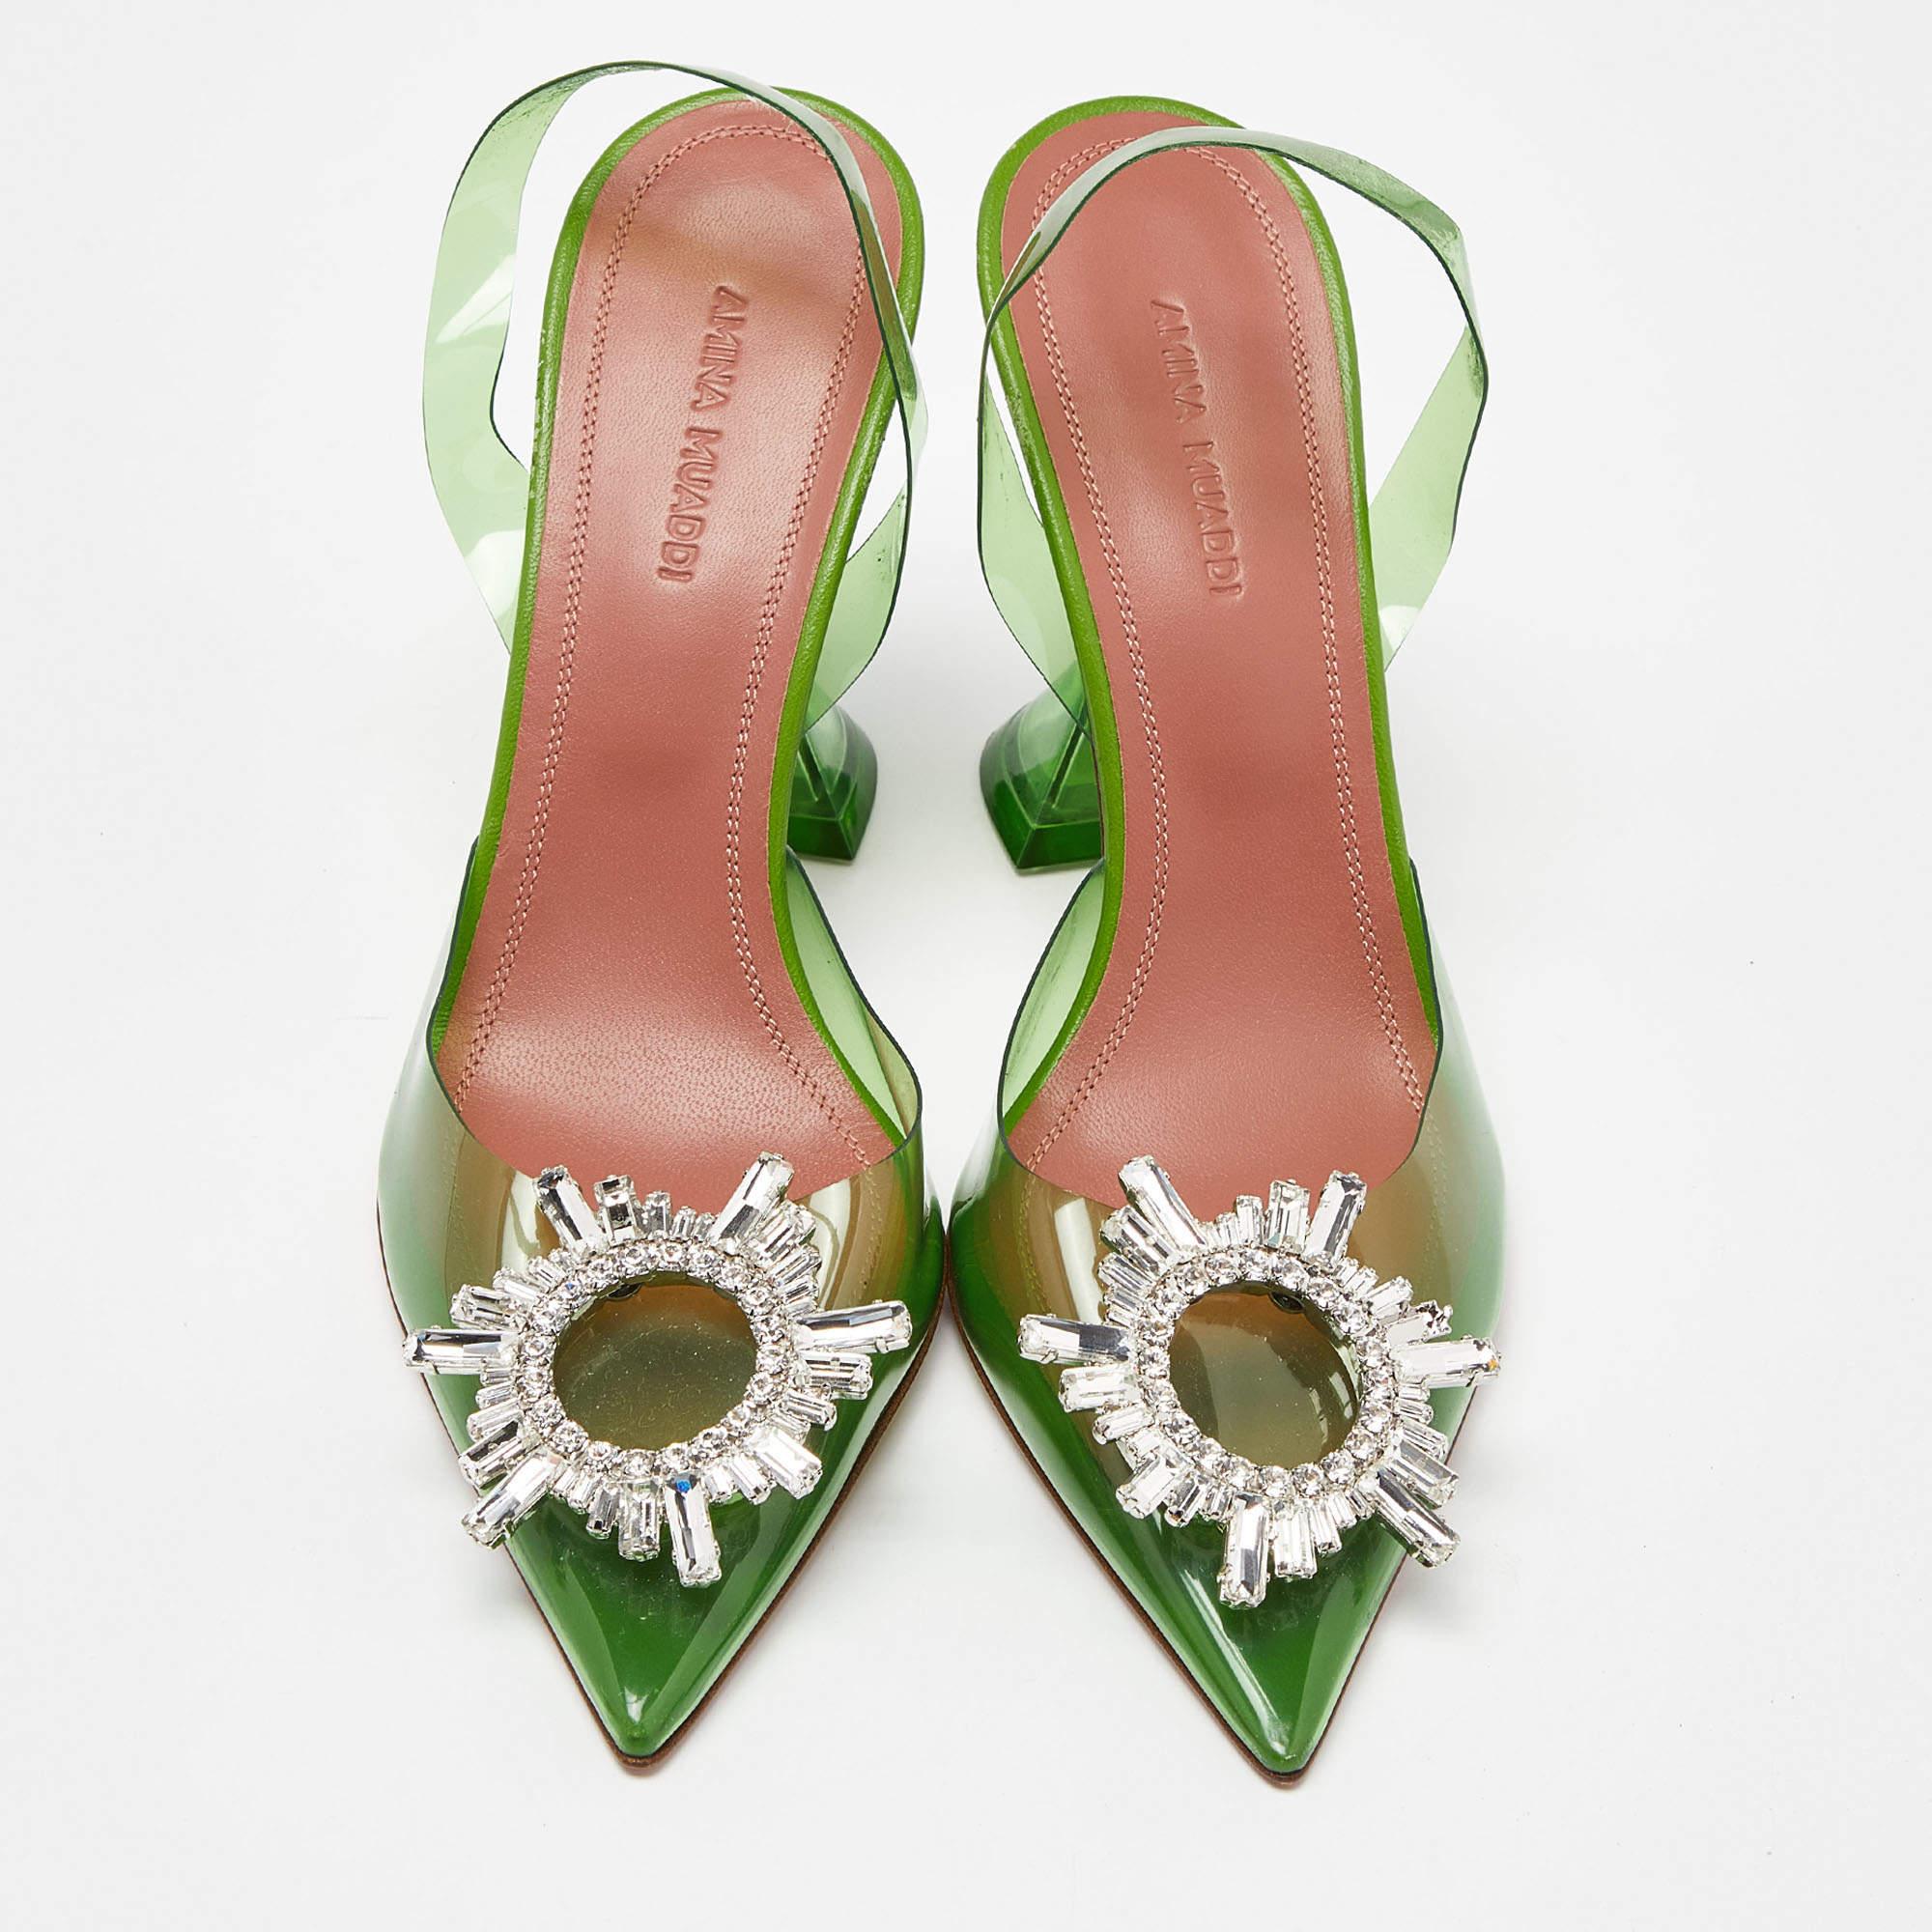 Carved perfectly into a feminine silhouette, this pair of mules from Amina Muaddi accurately denote the label's skilled craftsmanship and style. It is made from PVC in an elegant green shade. These shoes are finished off with a slingback and